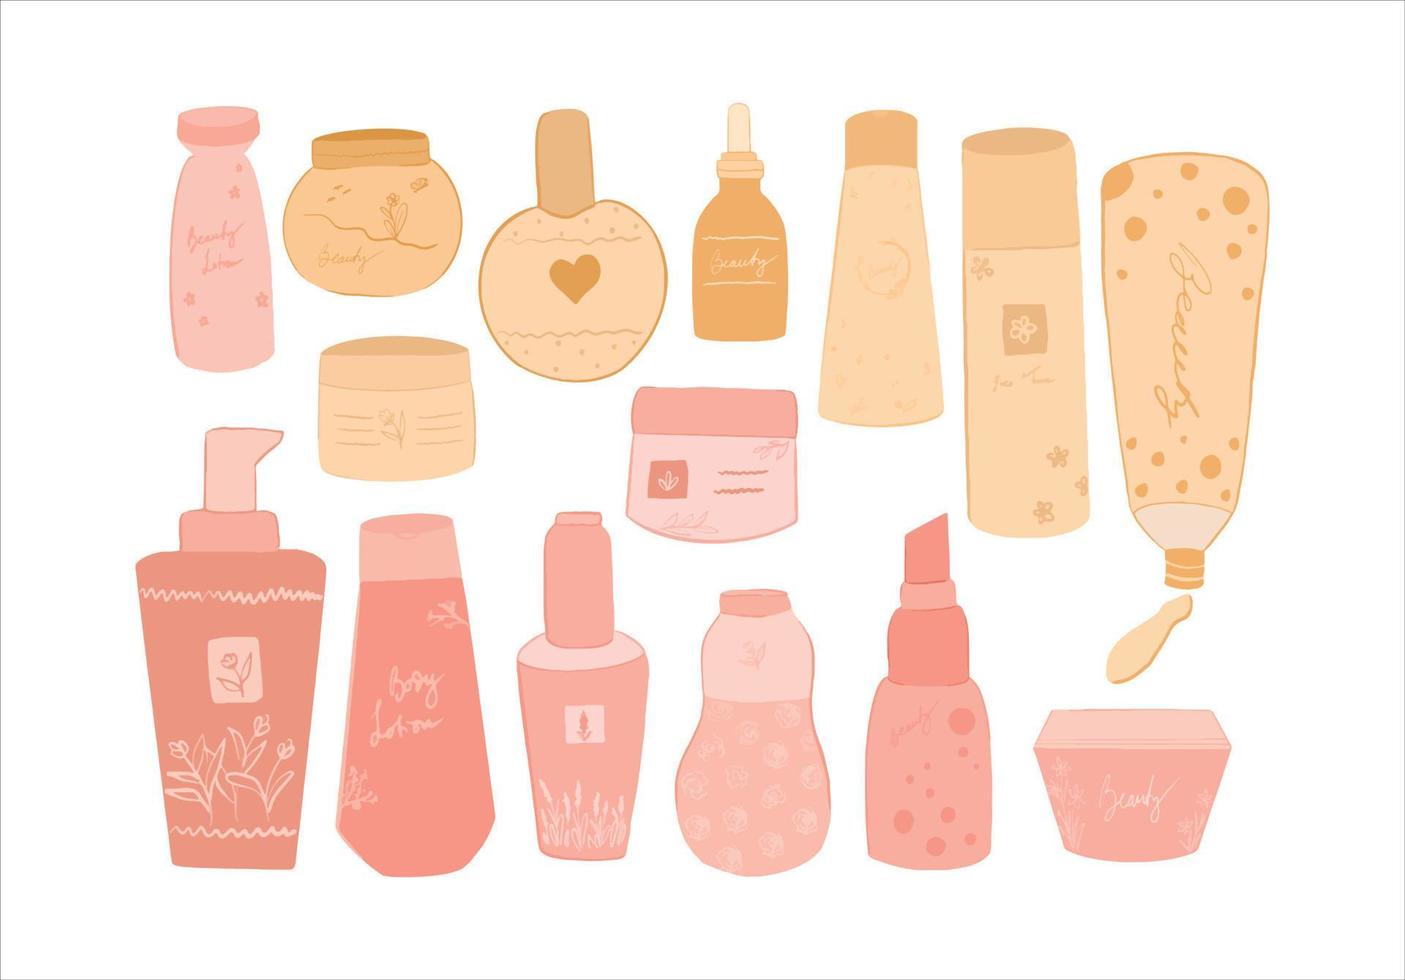 Beauty products, cosmetics for skin and hair care set vector illustrations of bottles, tubes, and jar